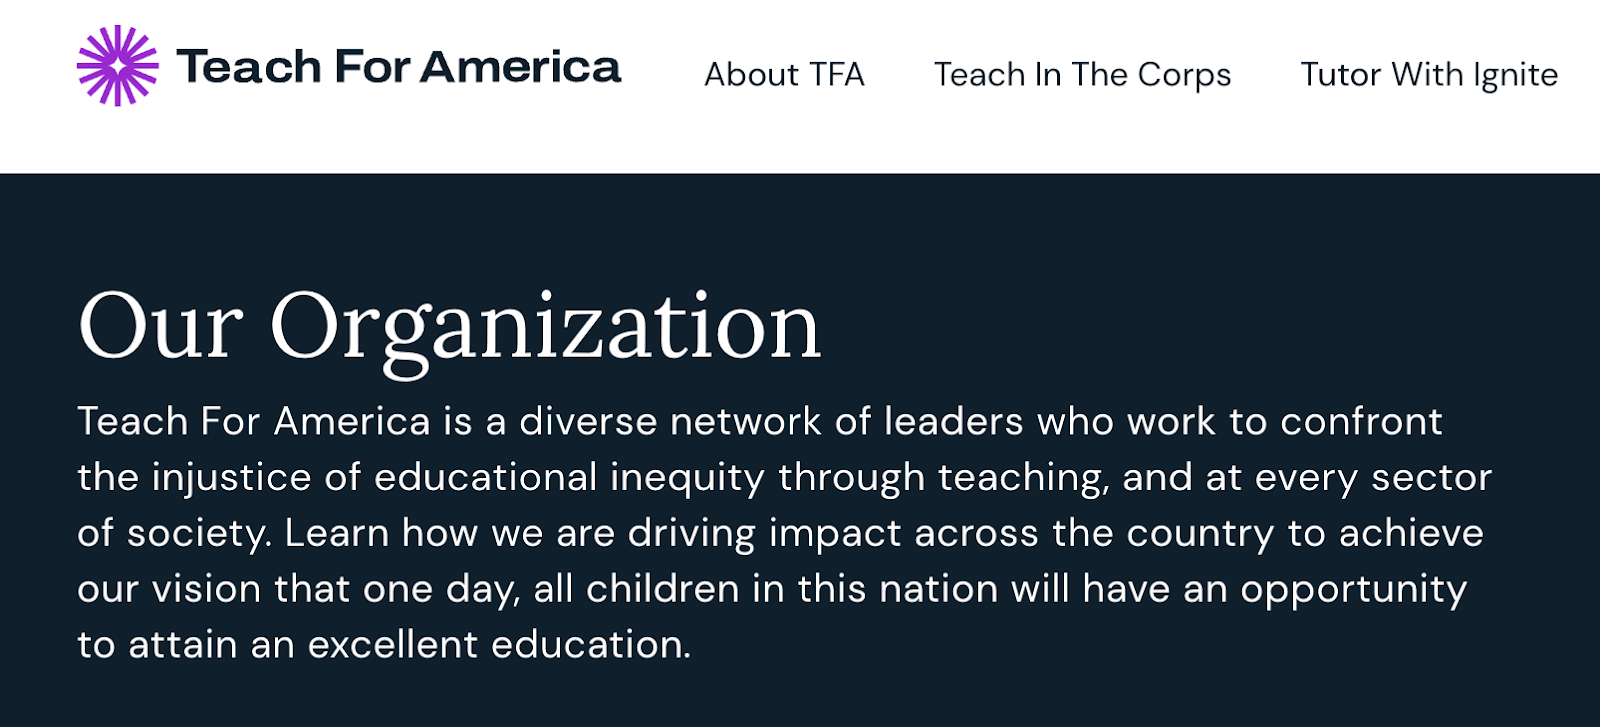 Best Vision Statement Examples: Teach for America